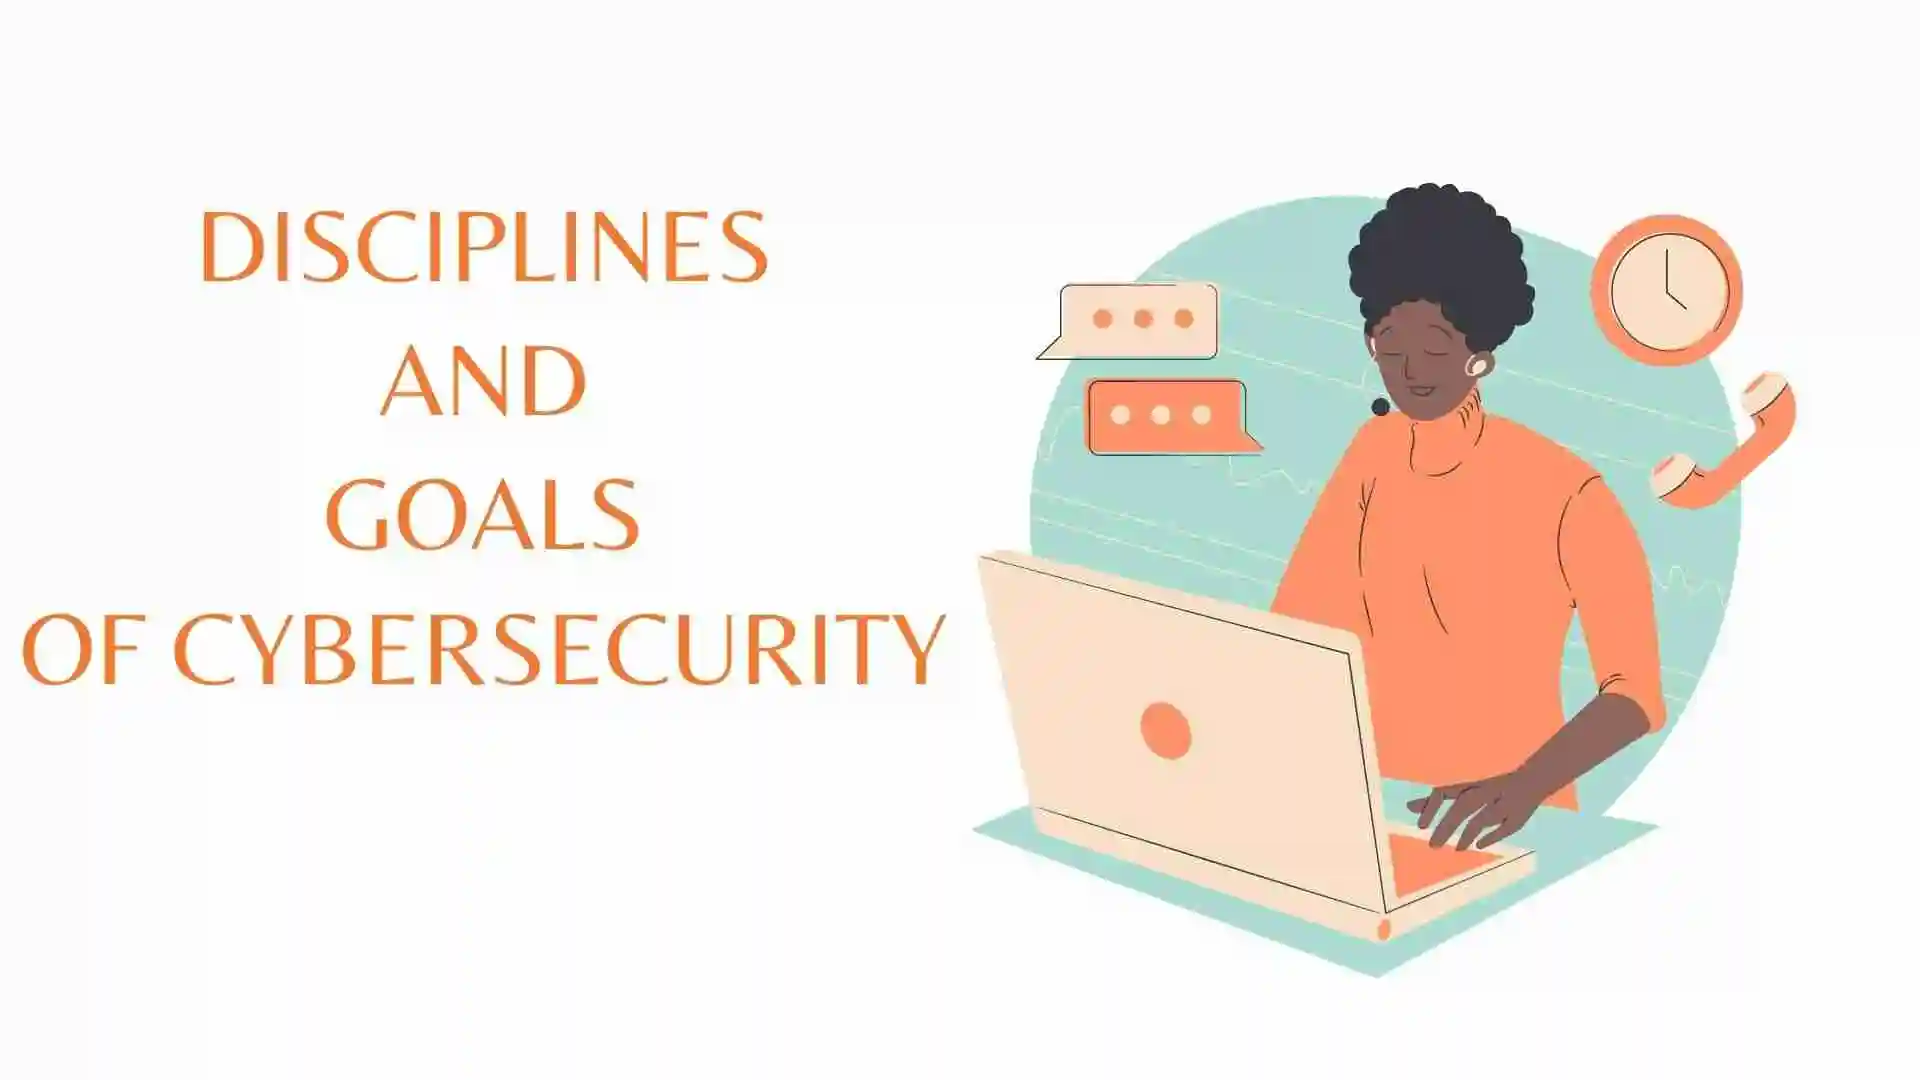 Disciplines of CyberSecurity | What are the goals of CyberSecurity?